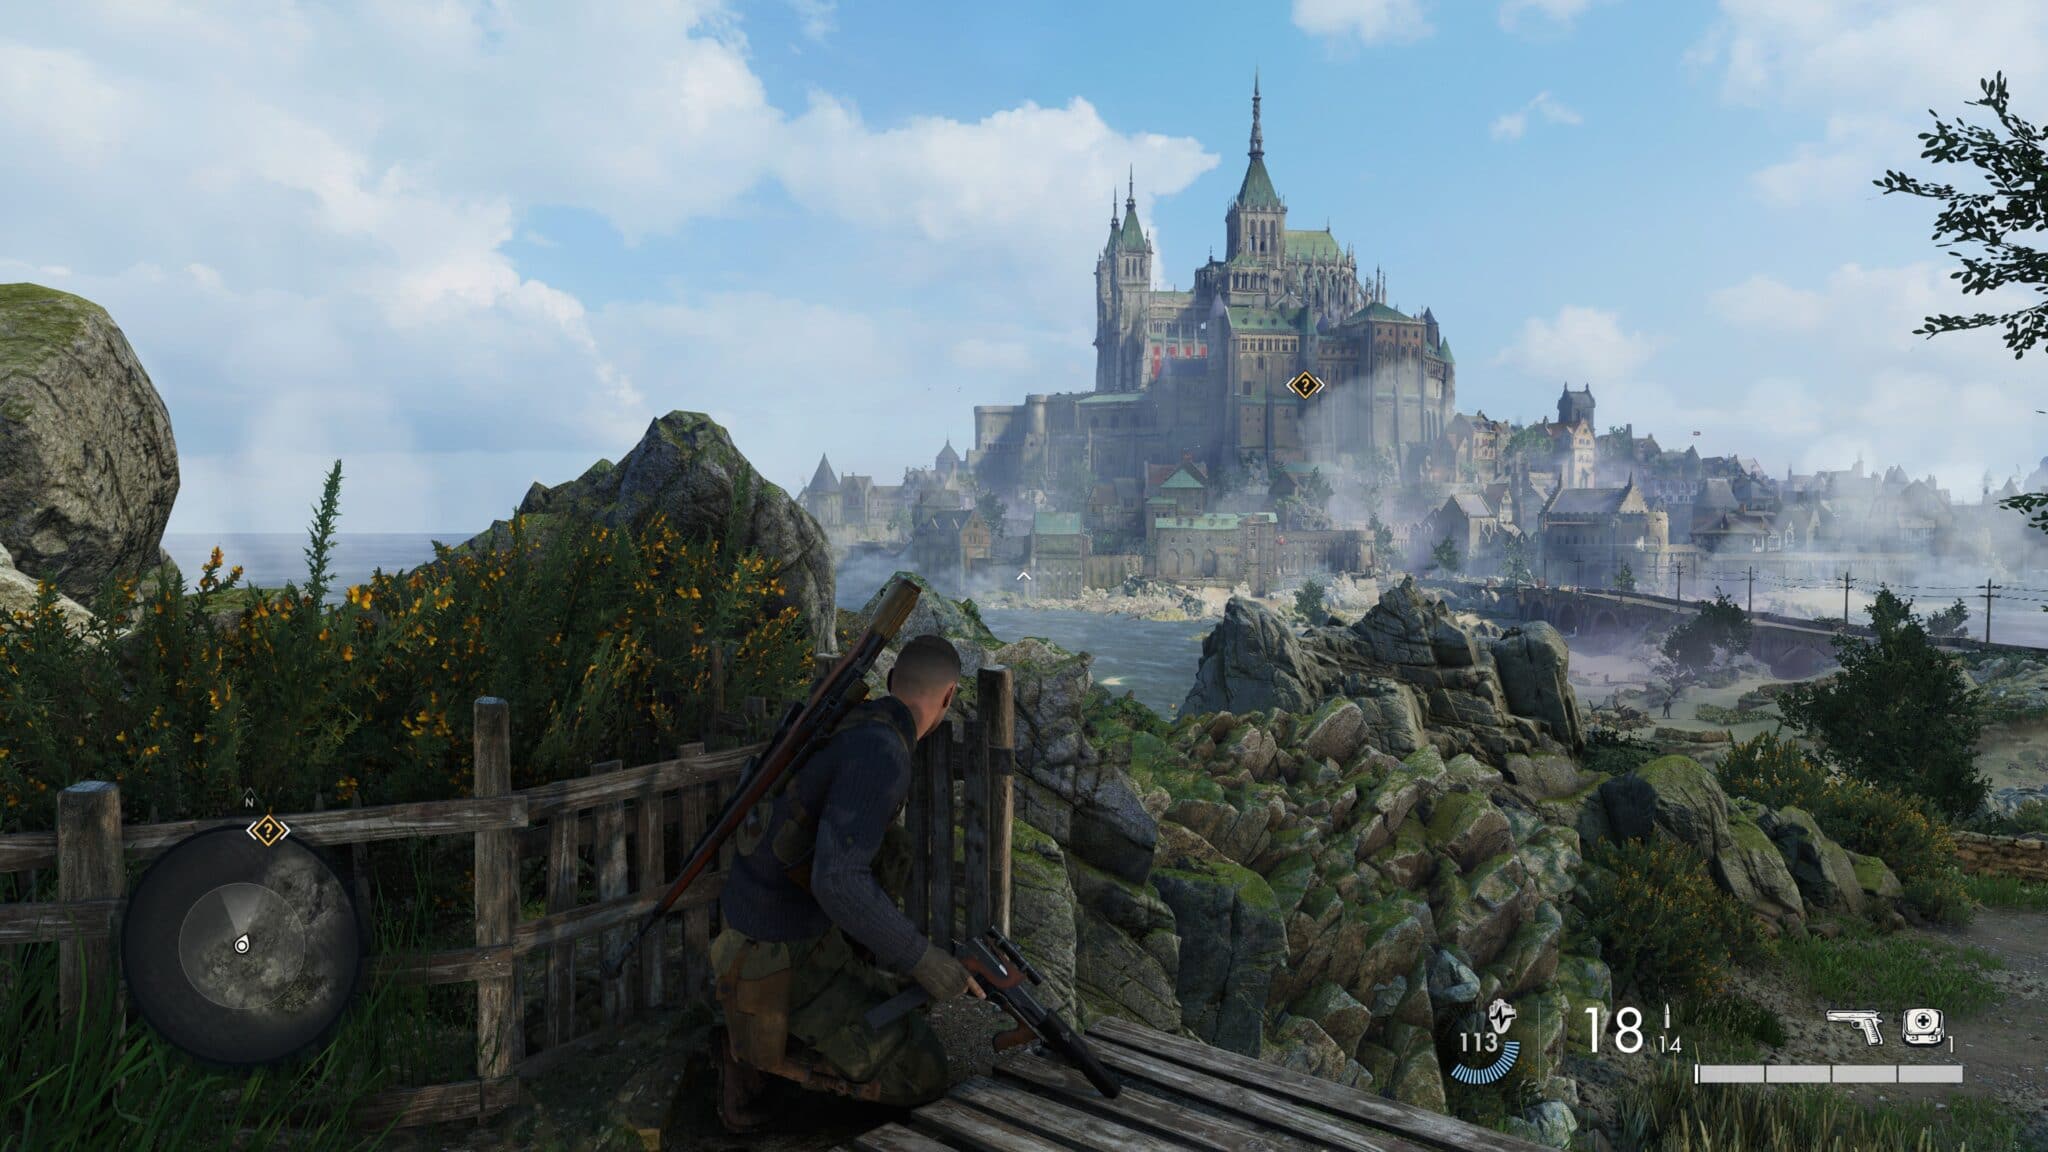 (Sniper Elite 5's mission maps are varied and some of them are really nicely designed like here in ... Anor Londo?!)